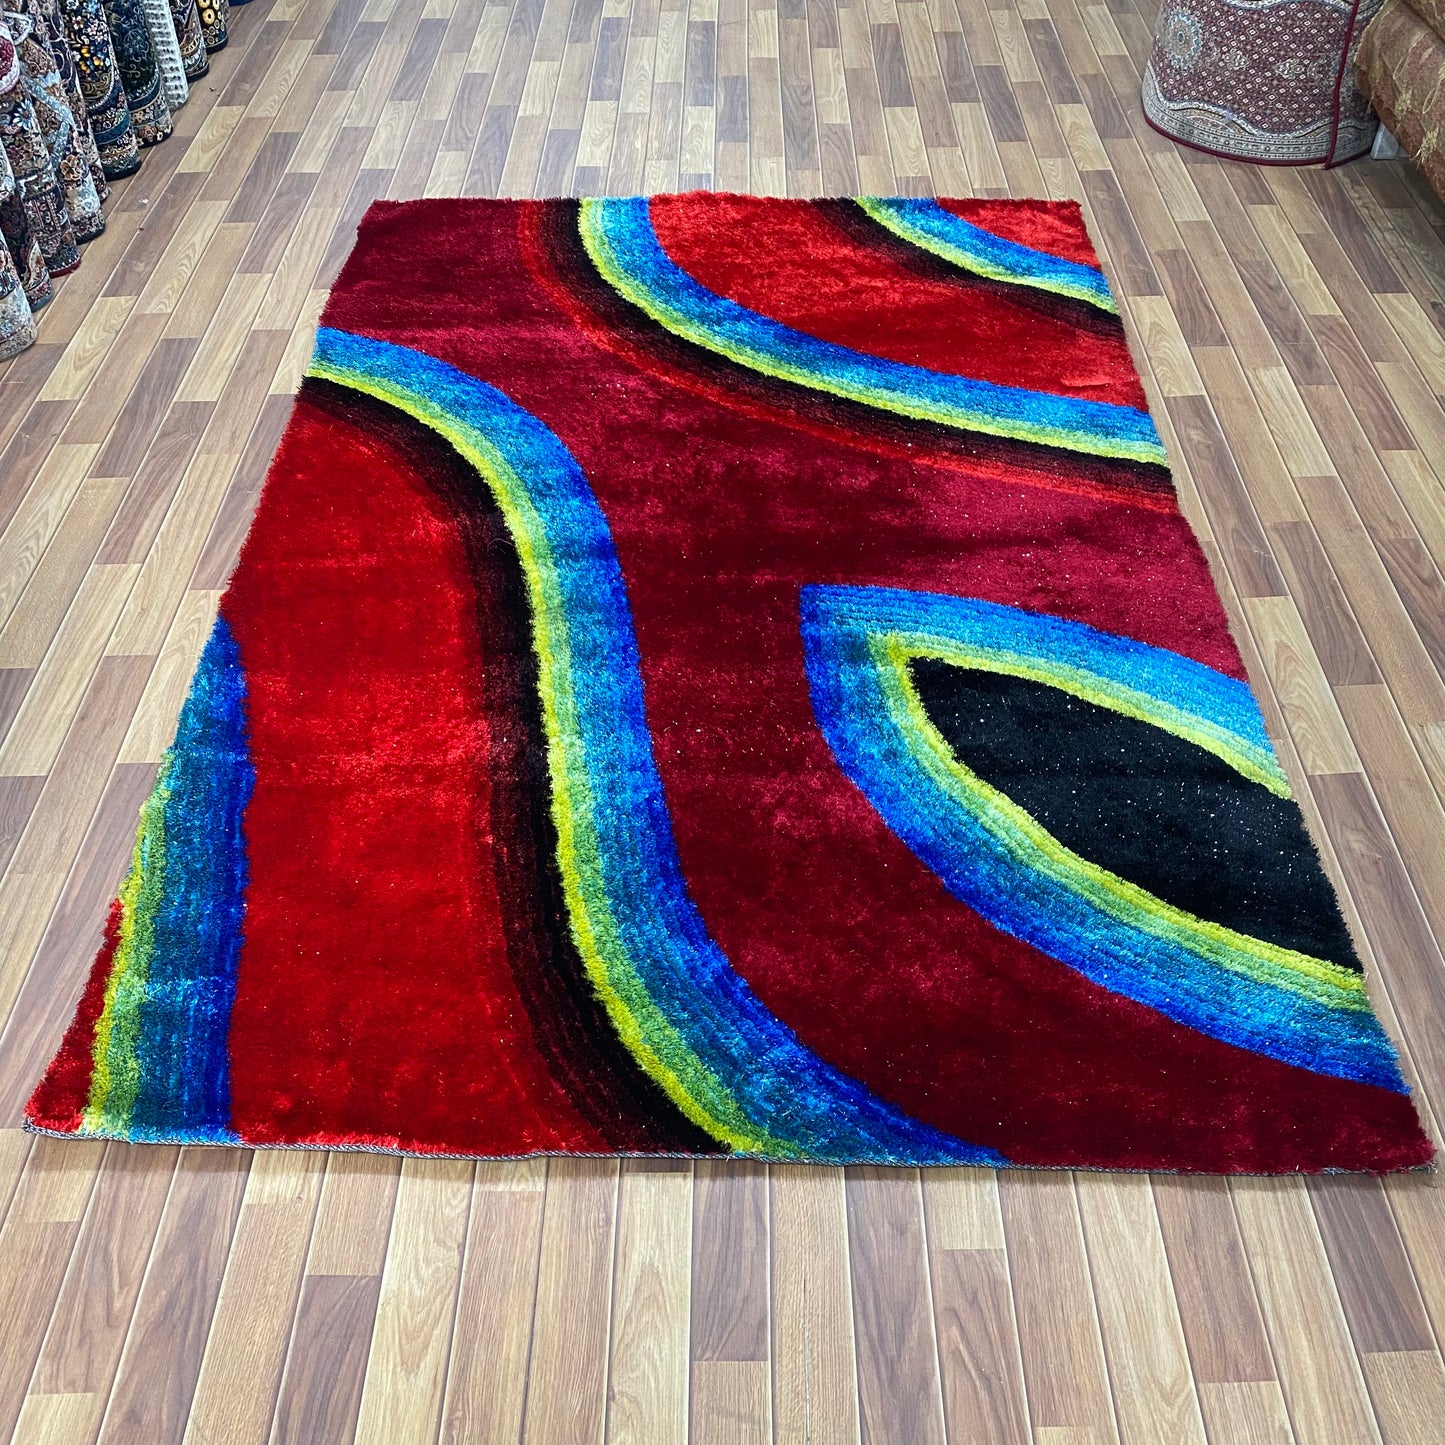 6 ft x 9 ft - Area Rug - Chinese - Shaggy 1 - Red Wine